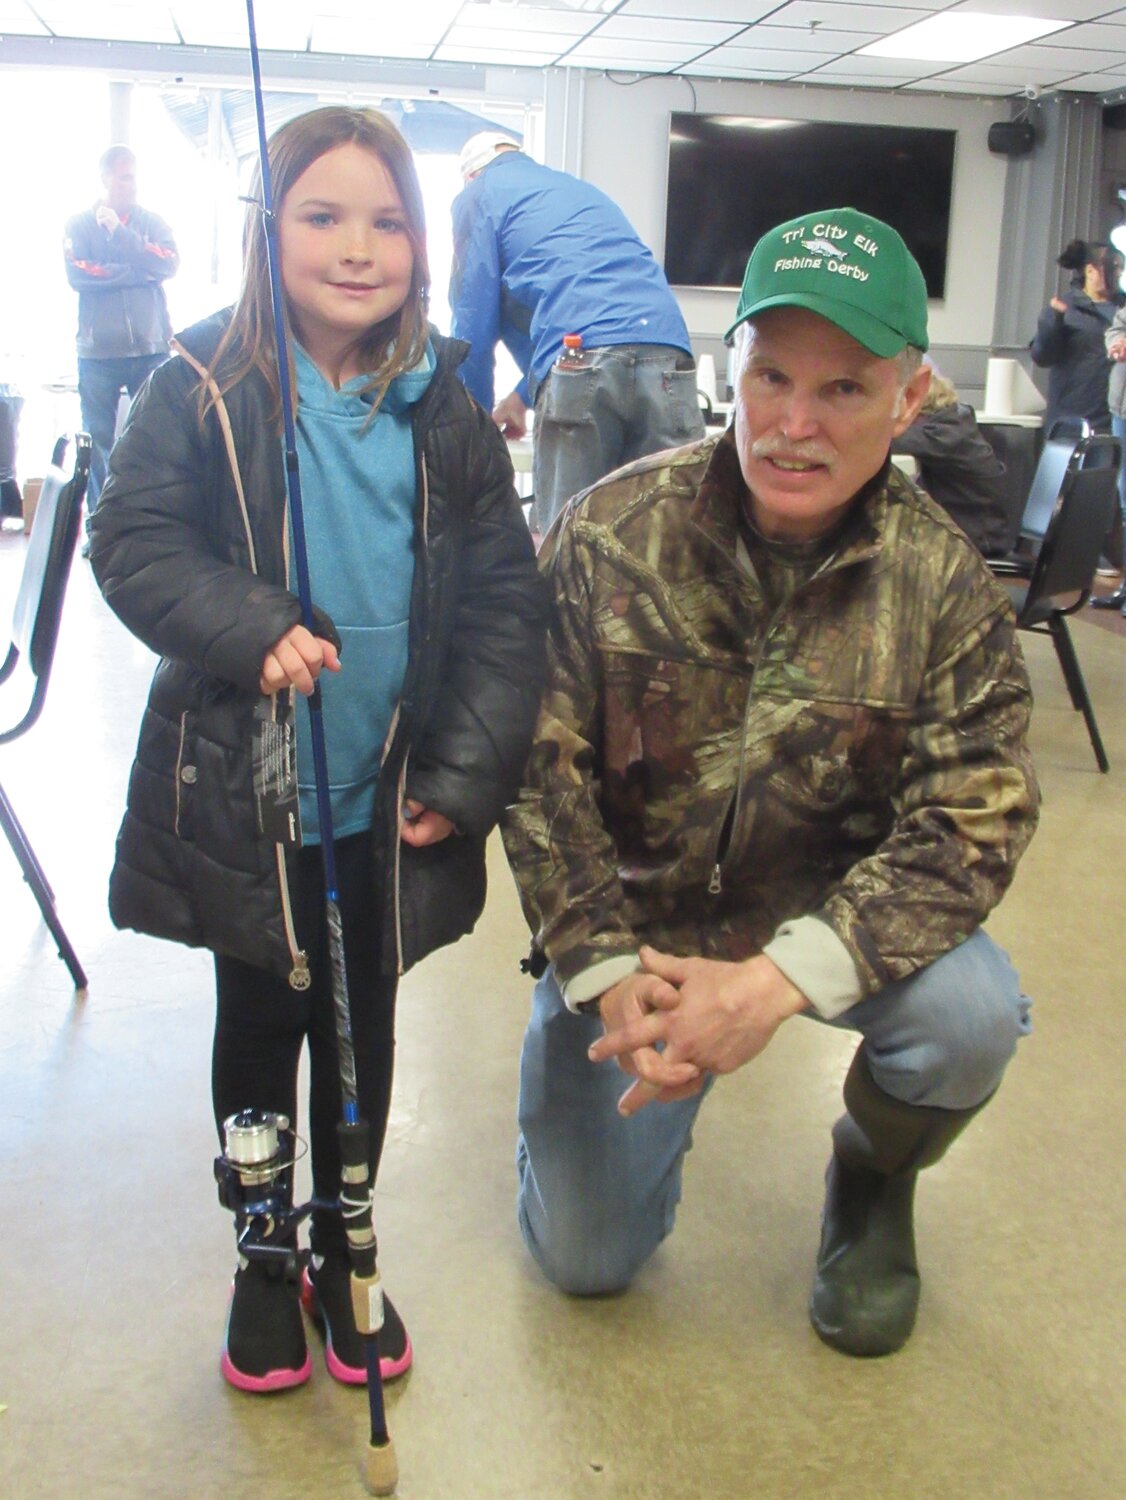 PERFECT PRIZE: Dave Brown, who chairs the trout division of the Tri-City Elks Kids Fishing Derby, presents the first-place prize to Olivia Smith, 8, for her 16.3-inch catch.